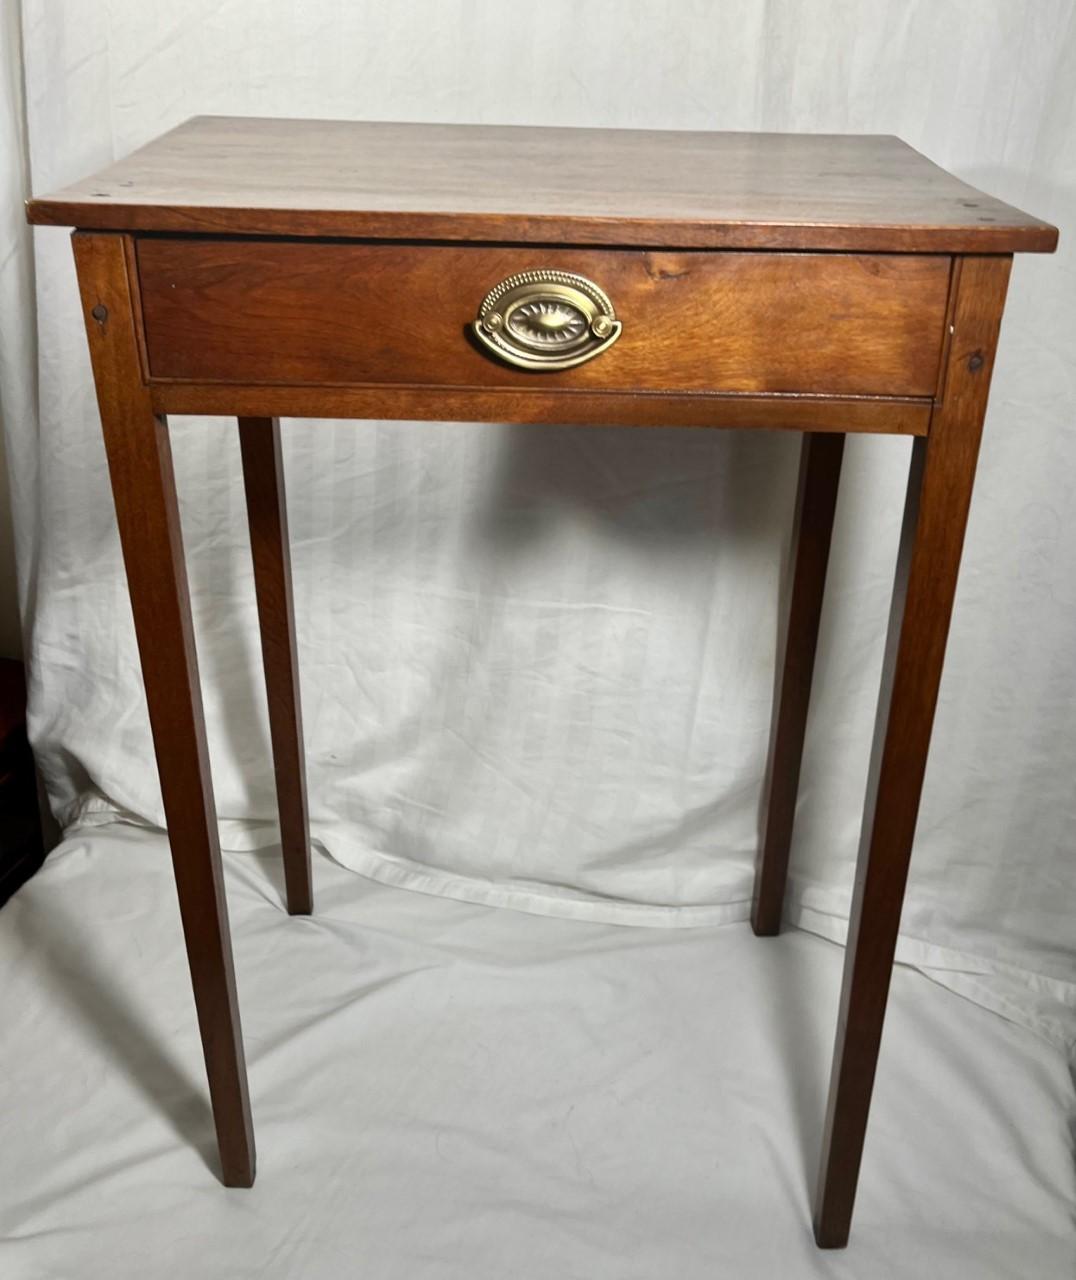 18th Century American Hepplewhite Federal Style Mahogany Side Table In Good Condition For Sale In Vero Beach, FL